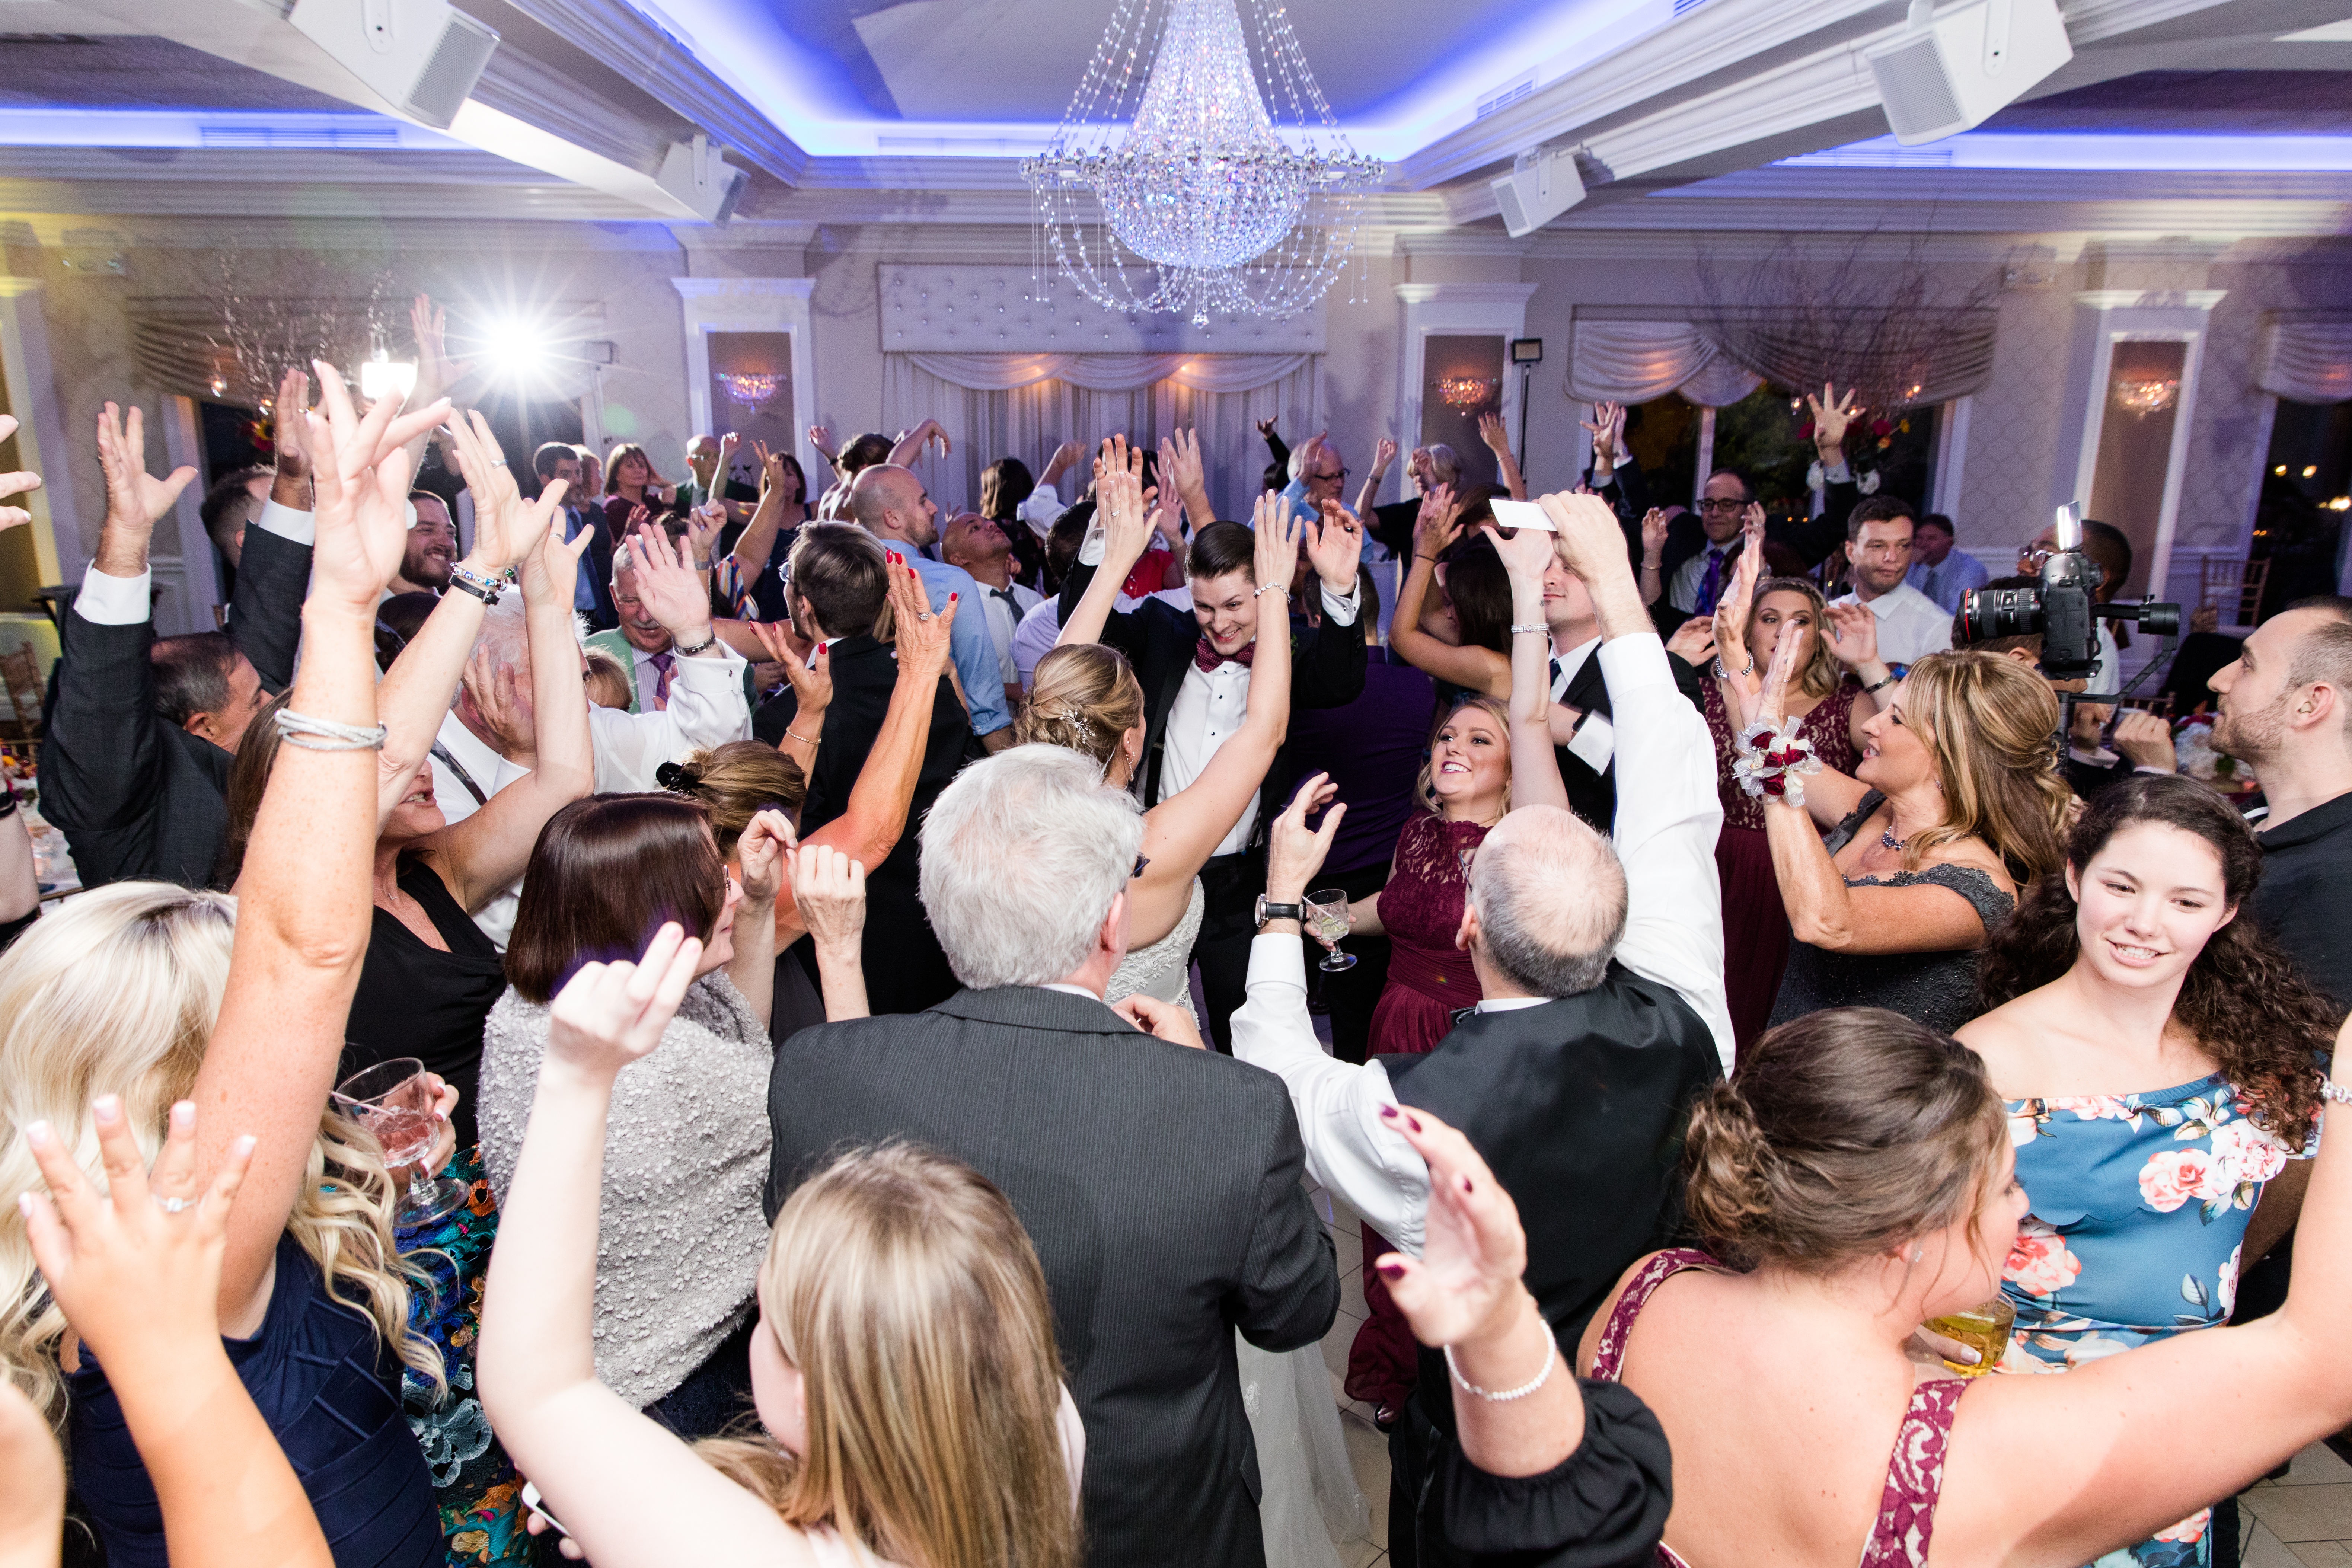 3 Ways To Make Sure Your Dance Floor Is Awesome